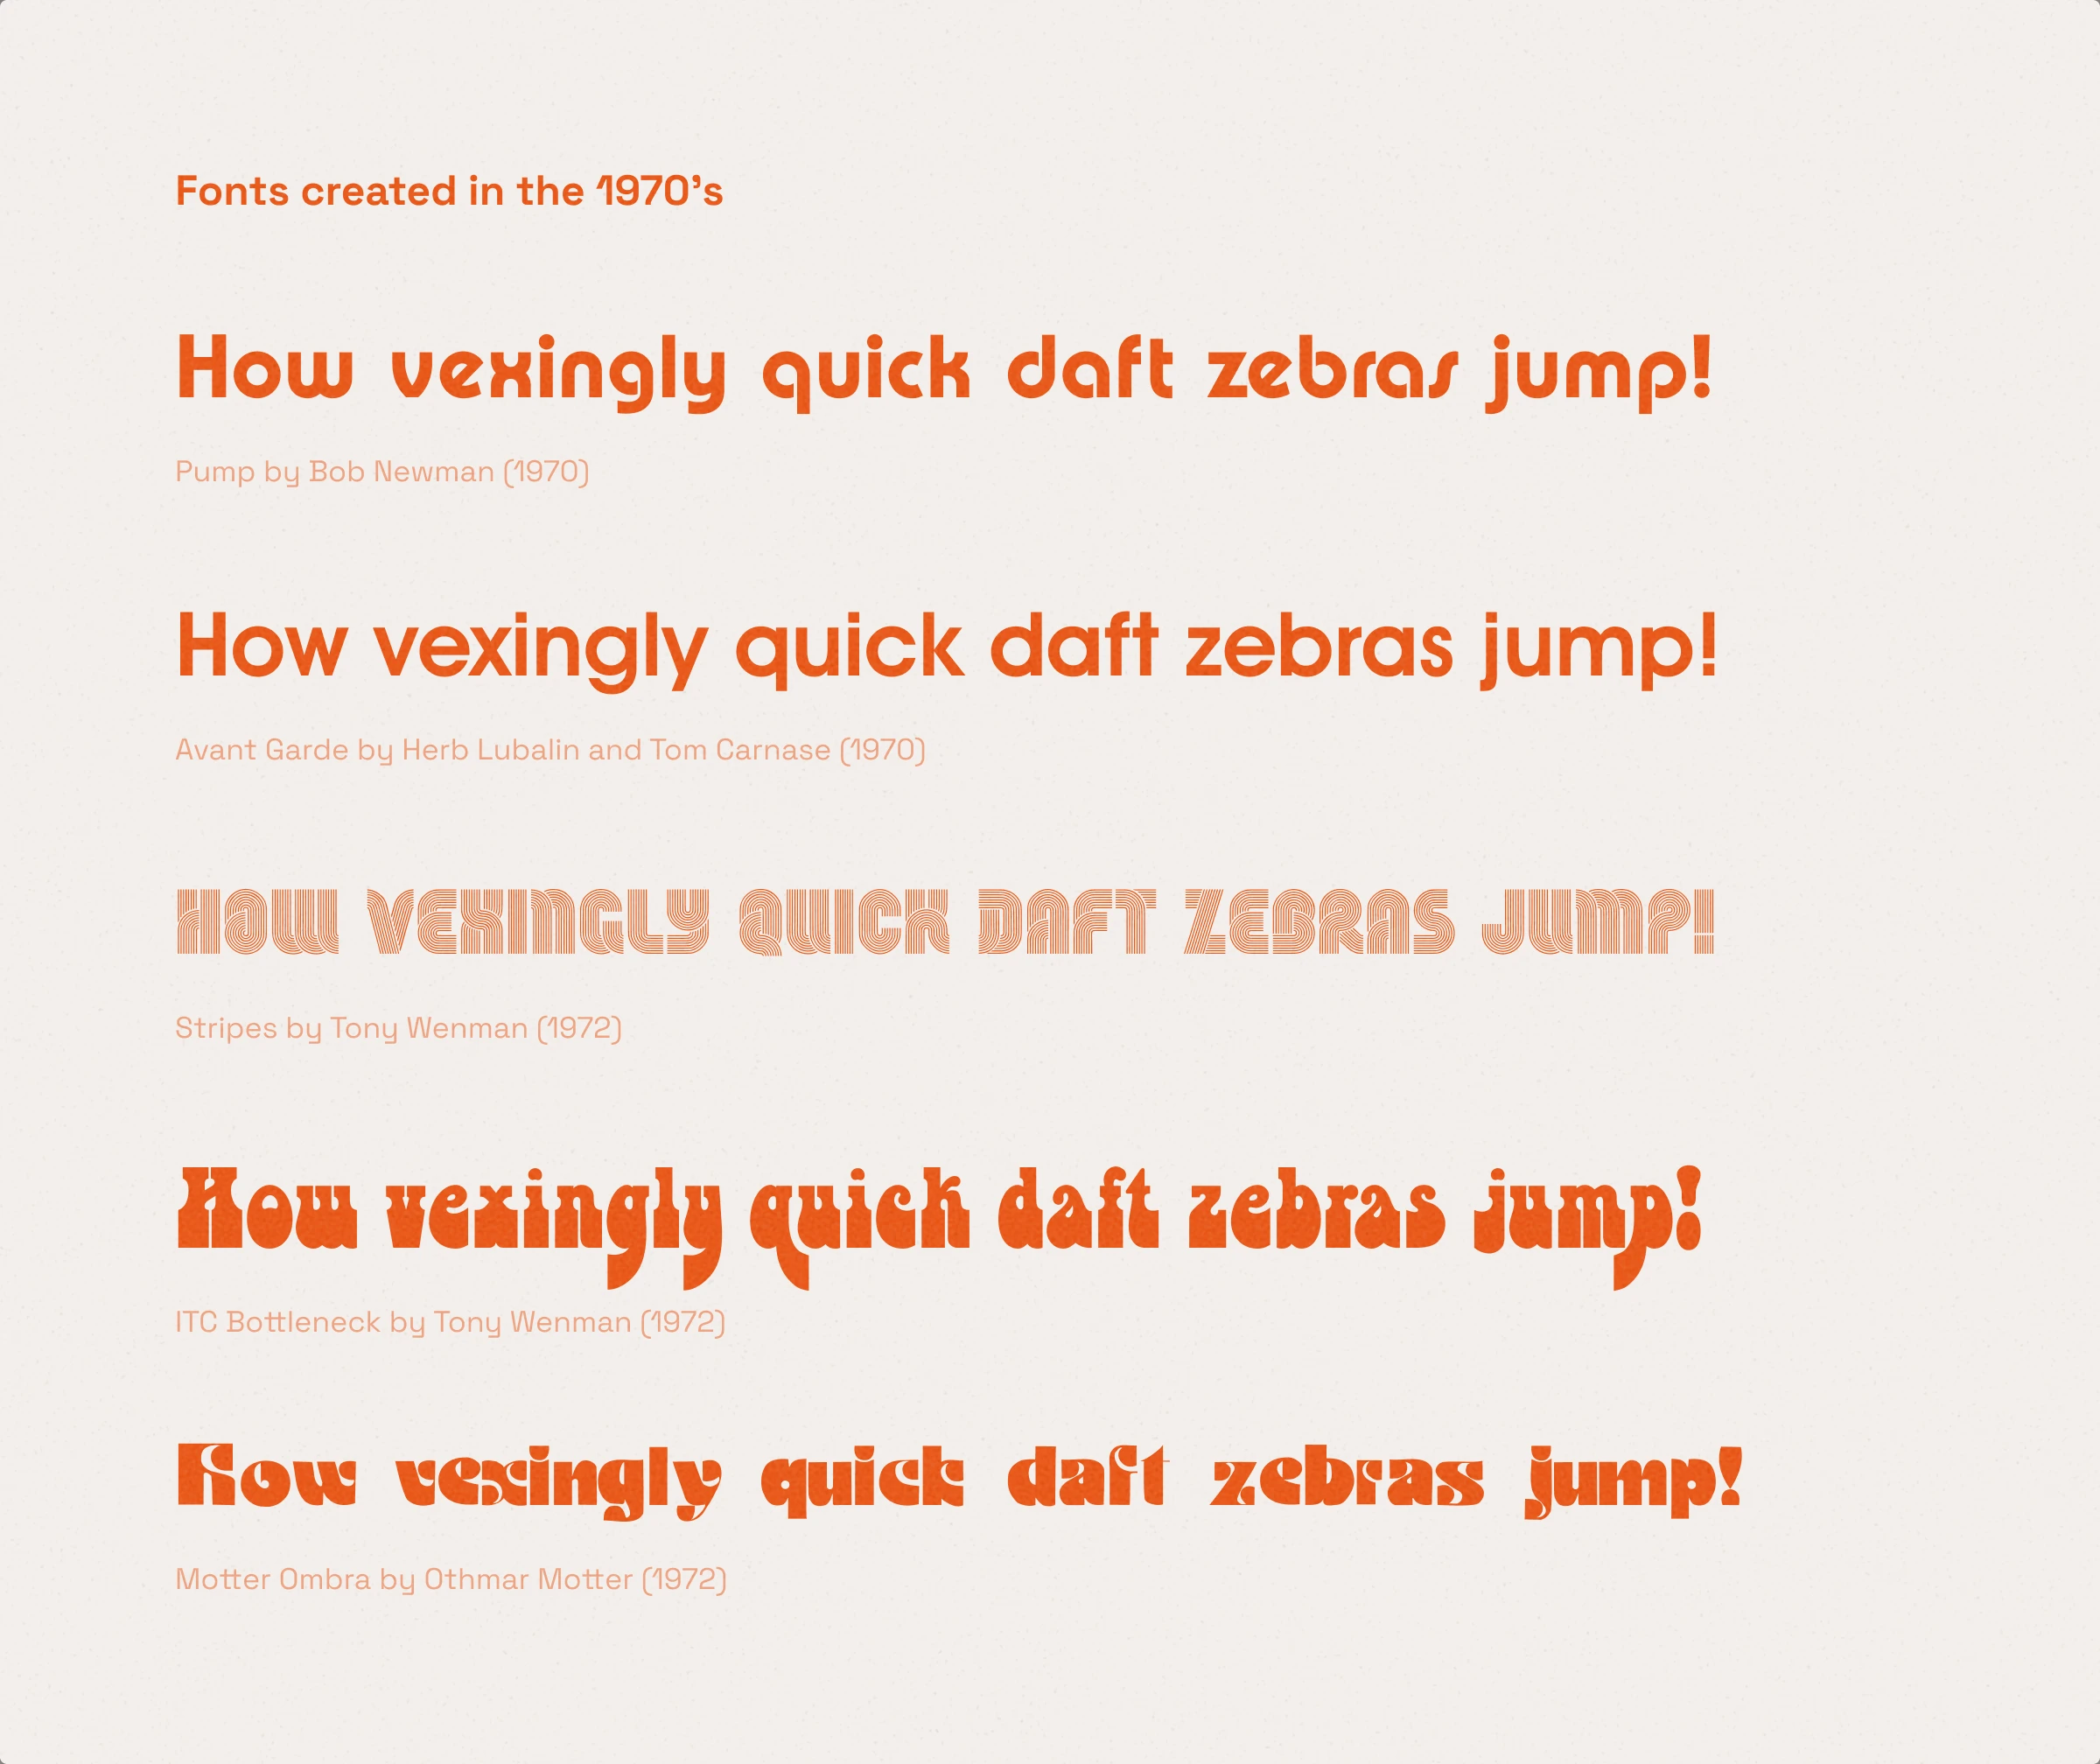 Fonts created in the 1970’s